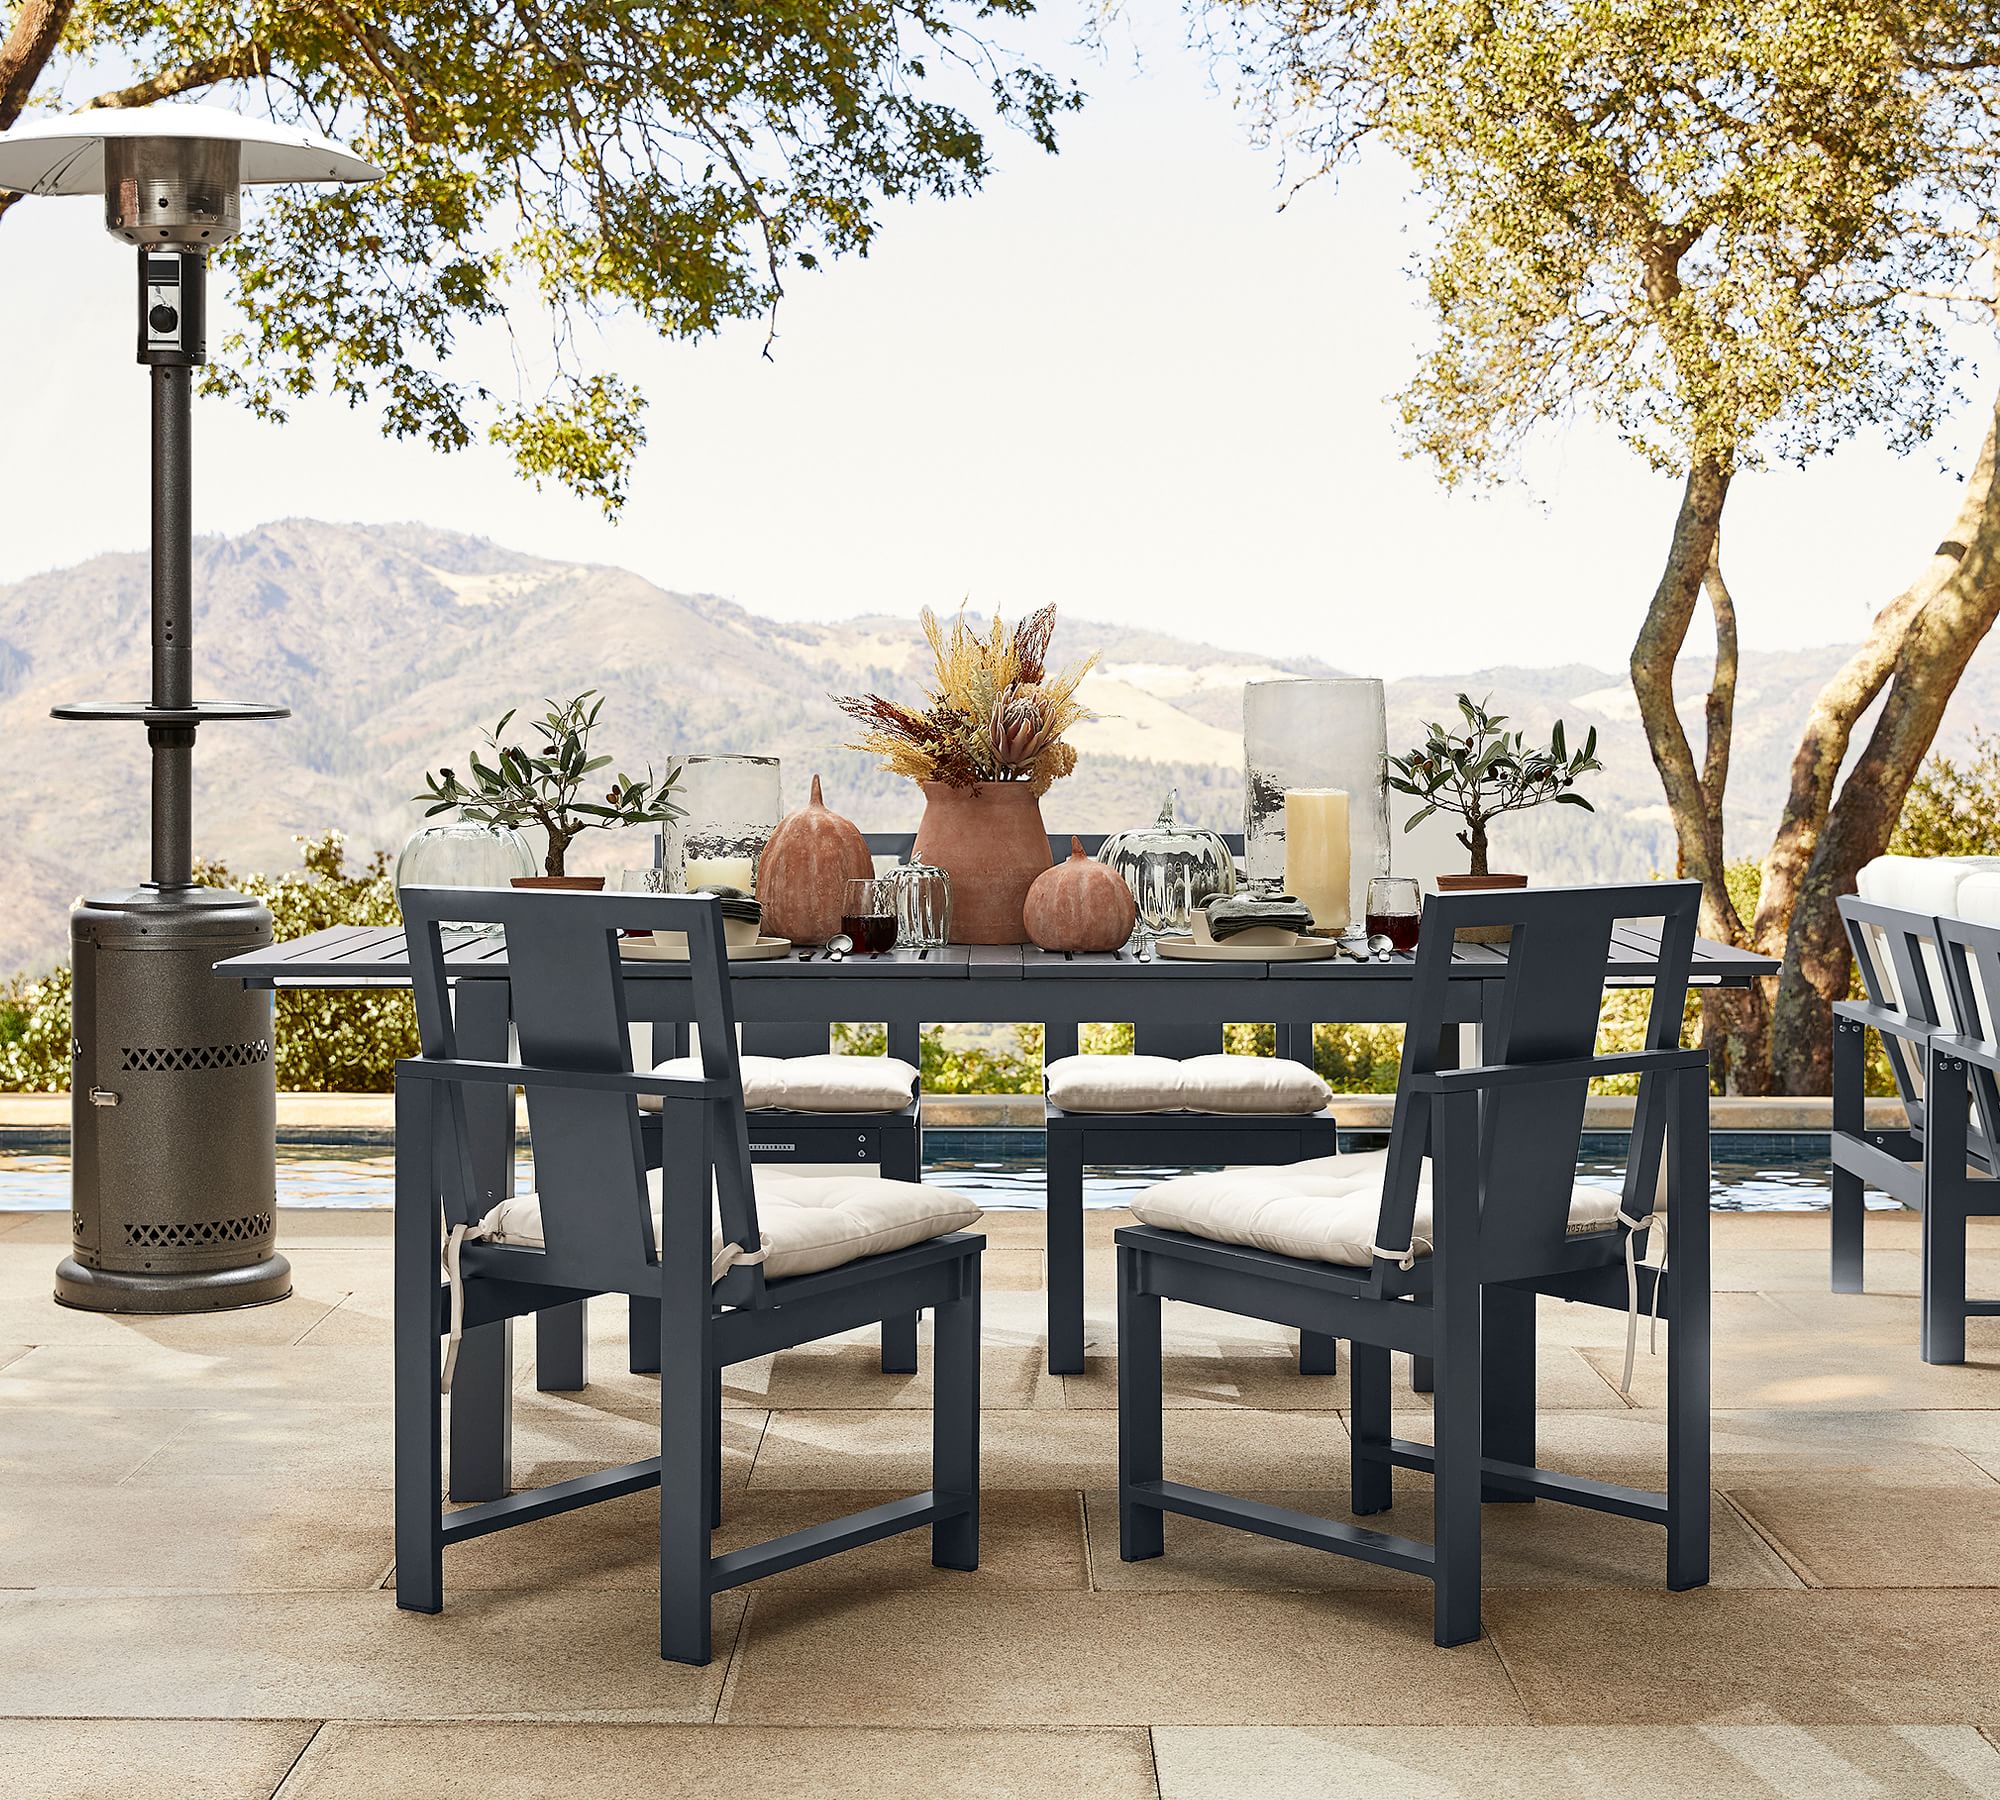 Pottery Barn: Up to 50% off on Outdoor Furniture Sale